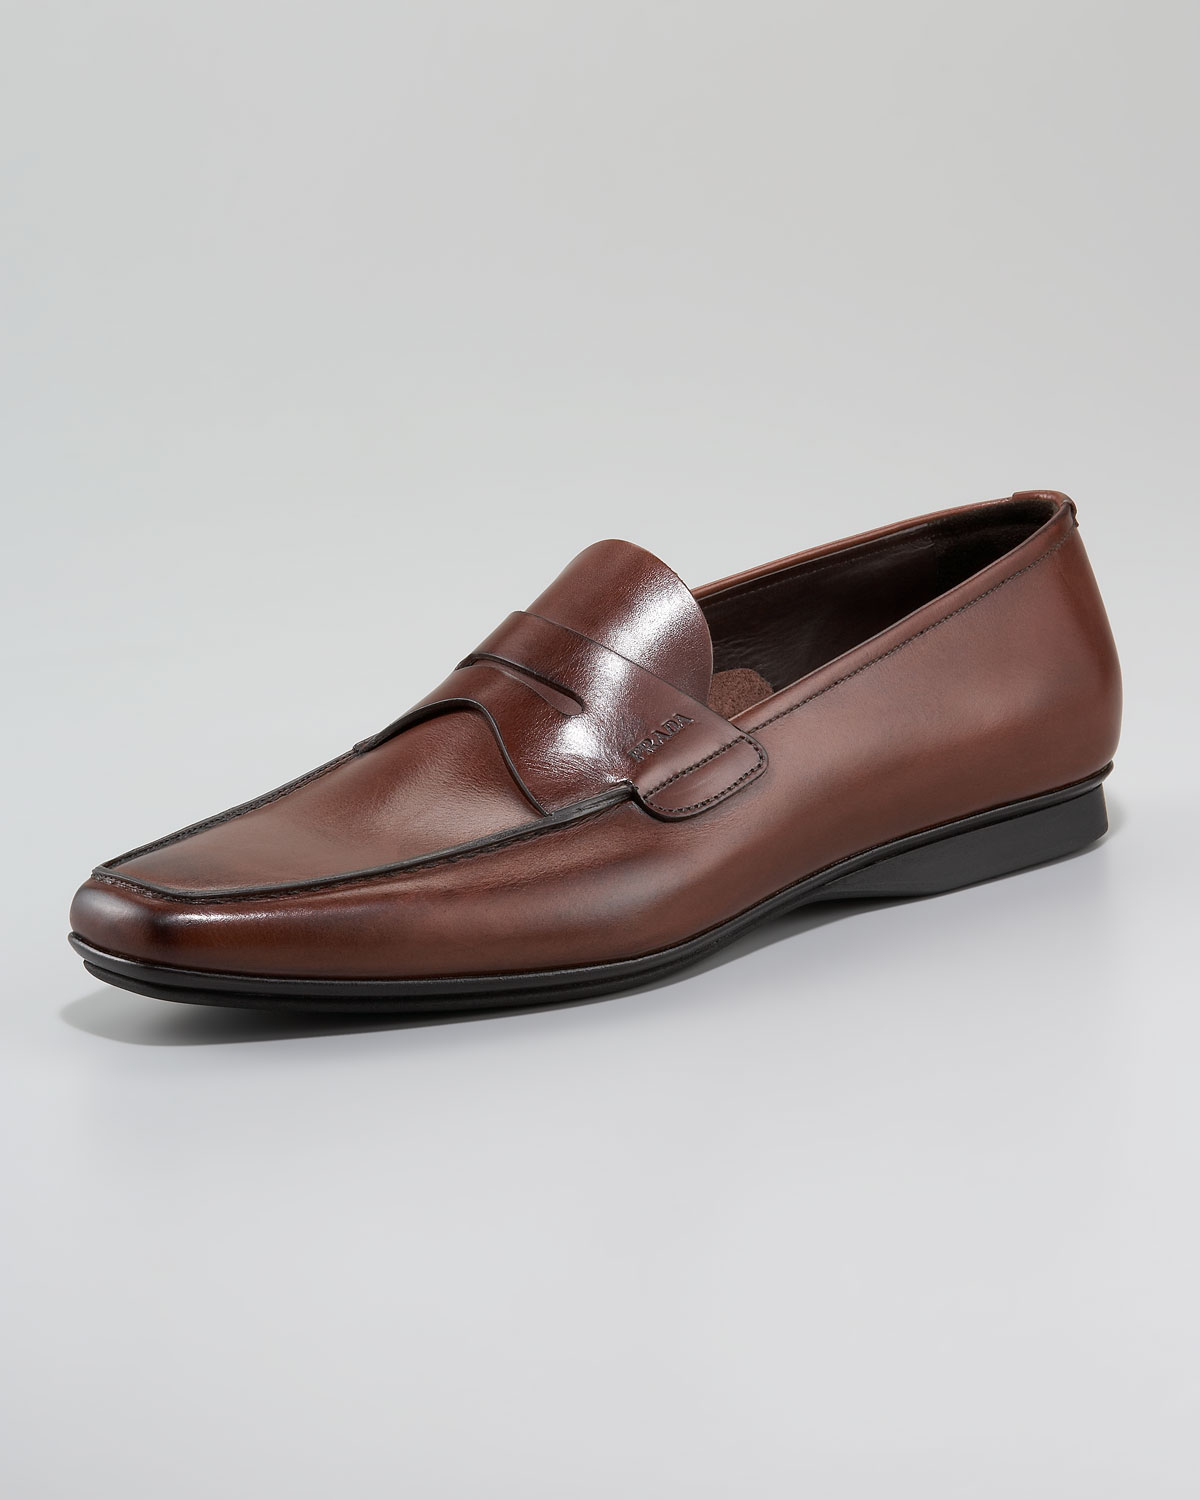 Lyst - Prada Leather Penny Loafer in Brown for Men